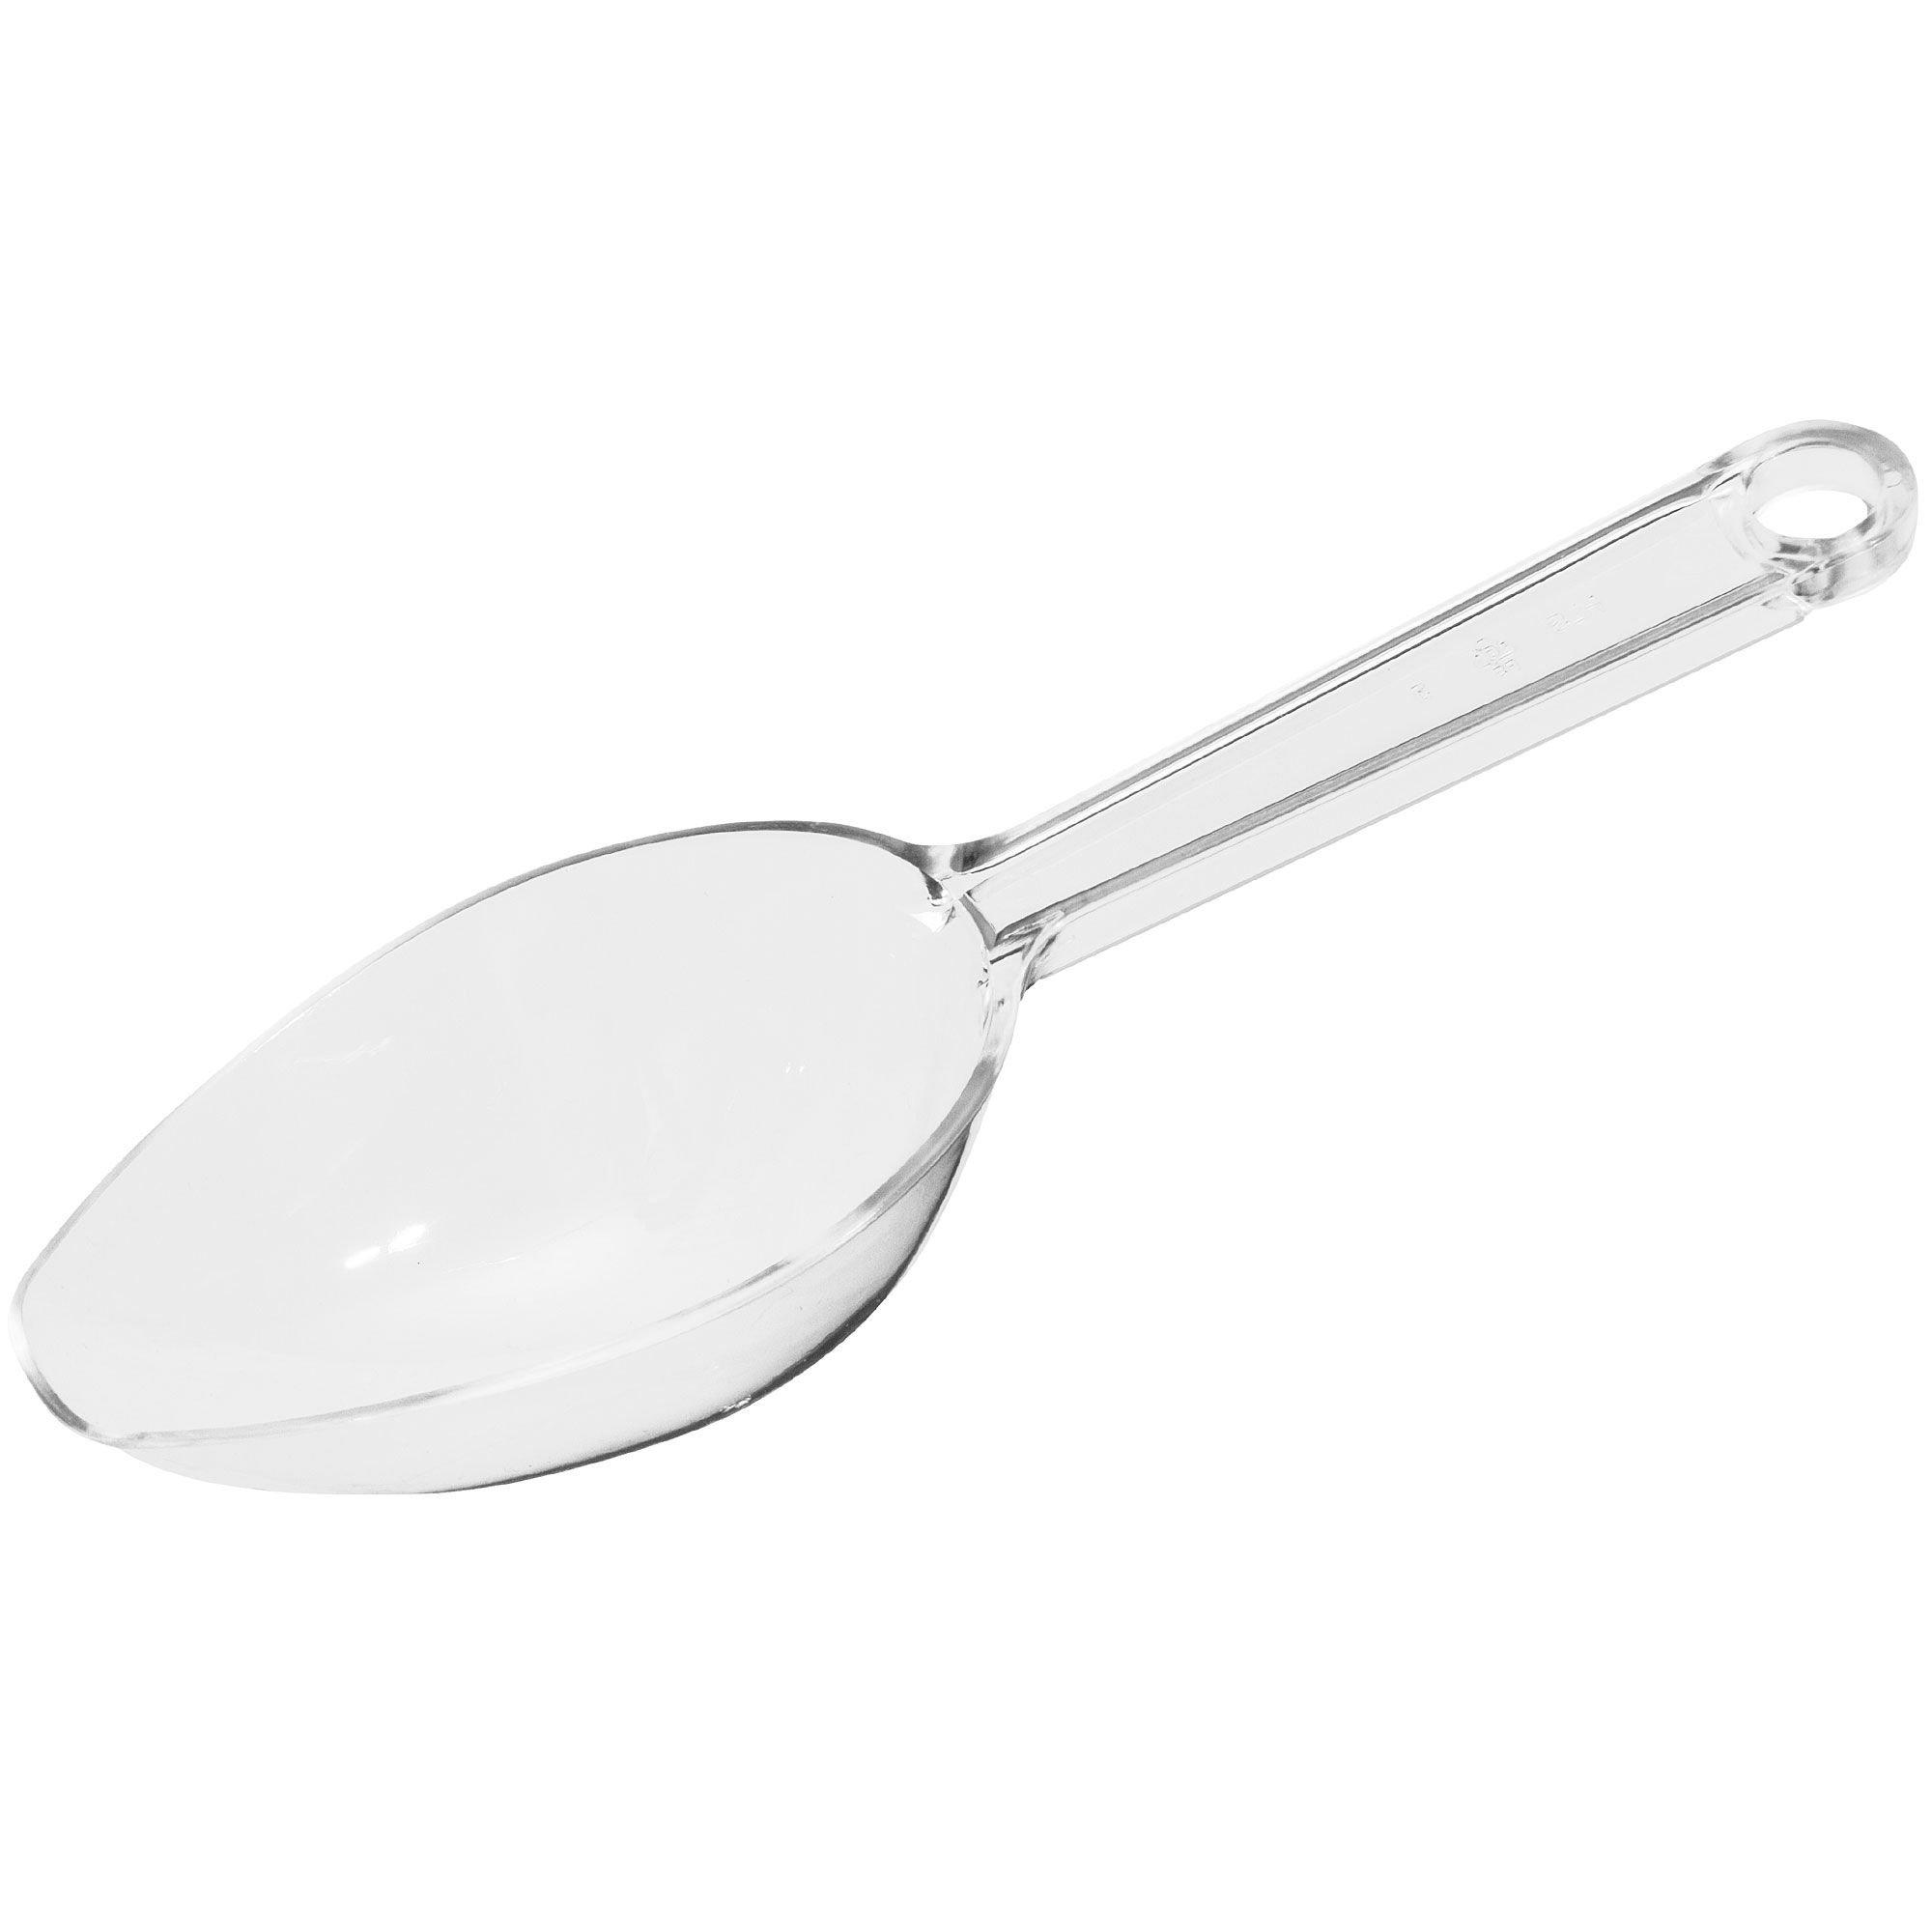 Plastic Candy Scoops Serving-ware, 6-1/2-inch, 6-Piece, Clear